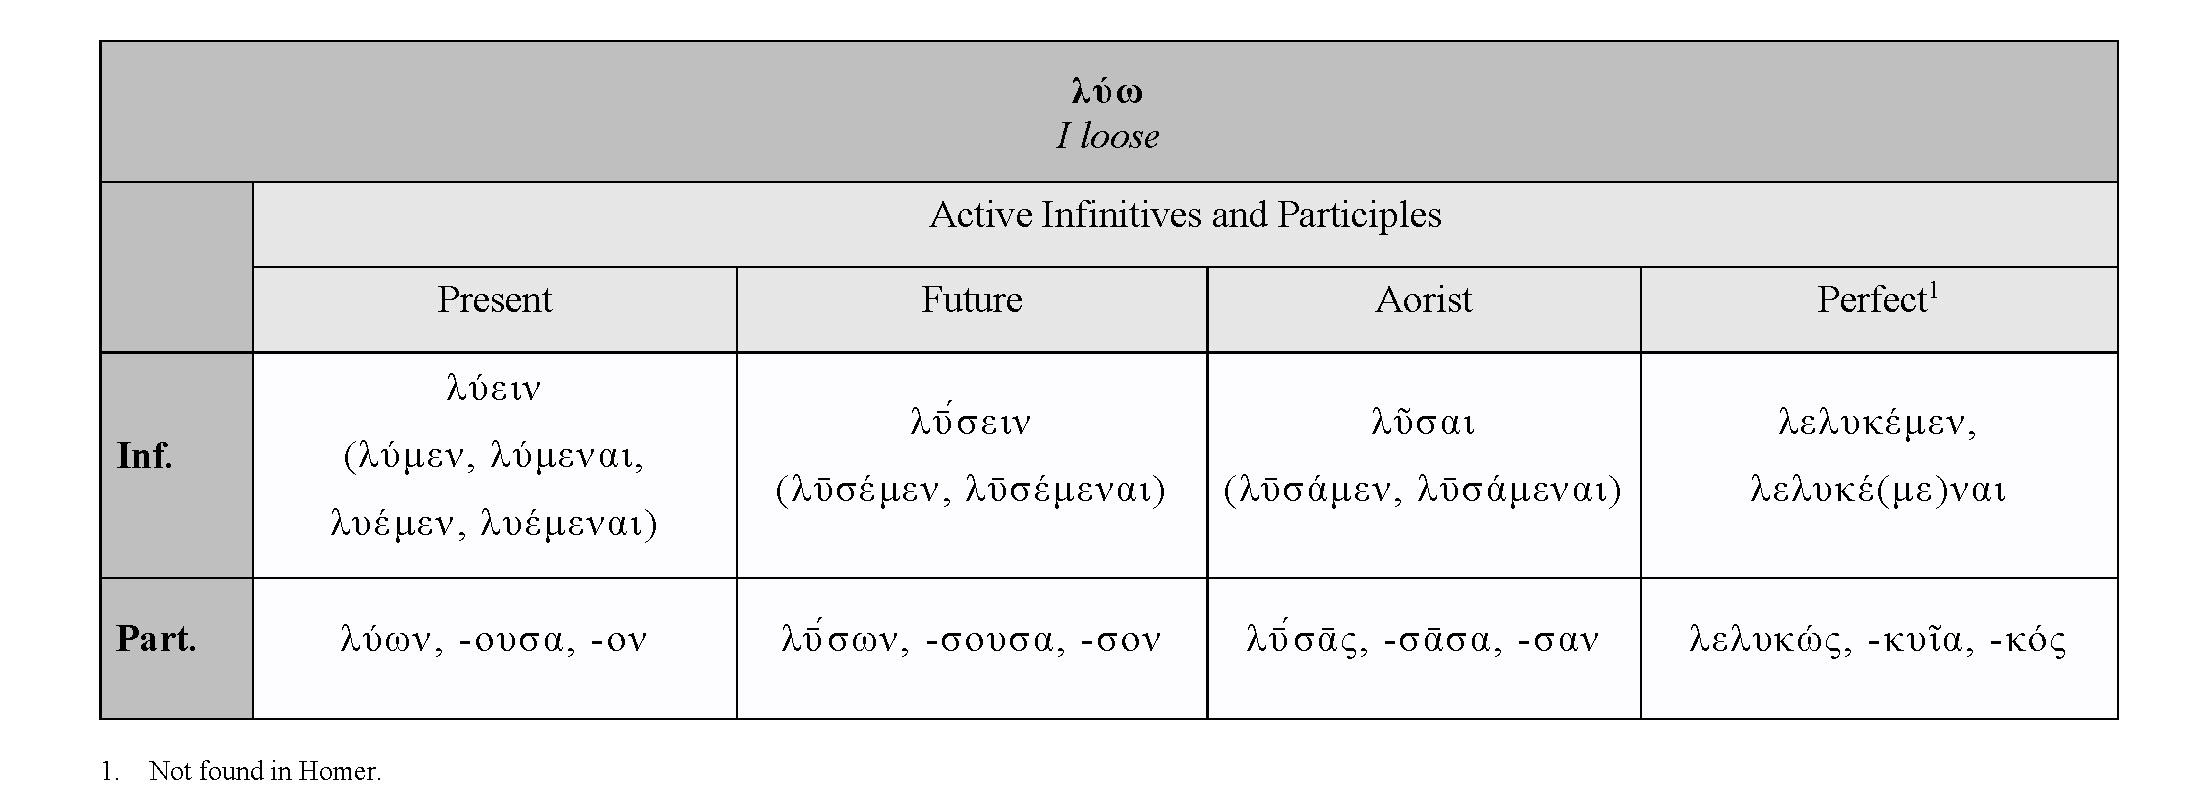 HOMERIC VERBS: ΛΎΩ ACTIVE INFINITIVES AND PARTICIPLES